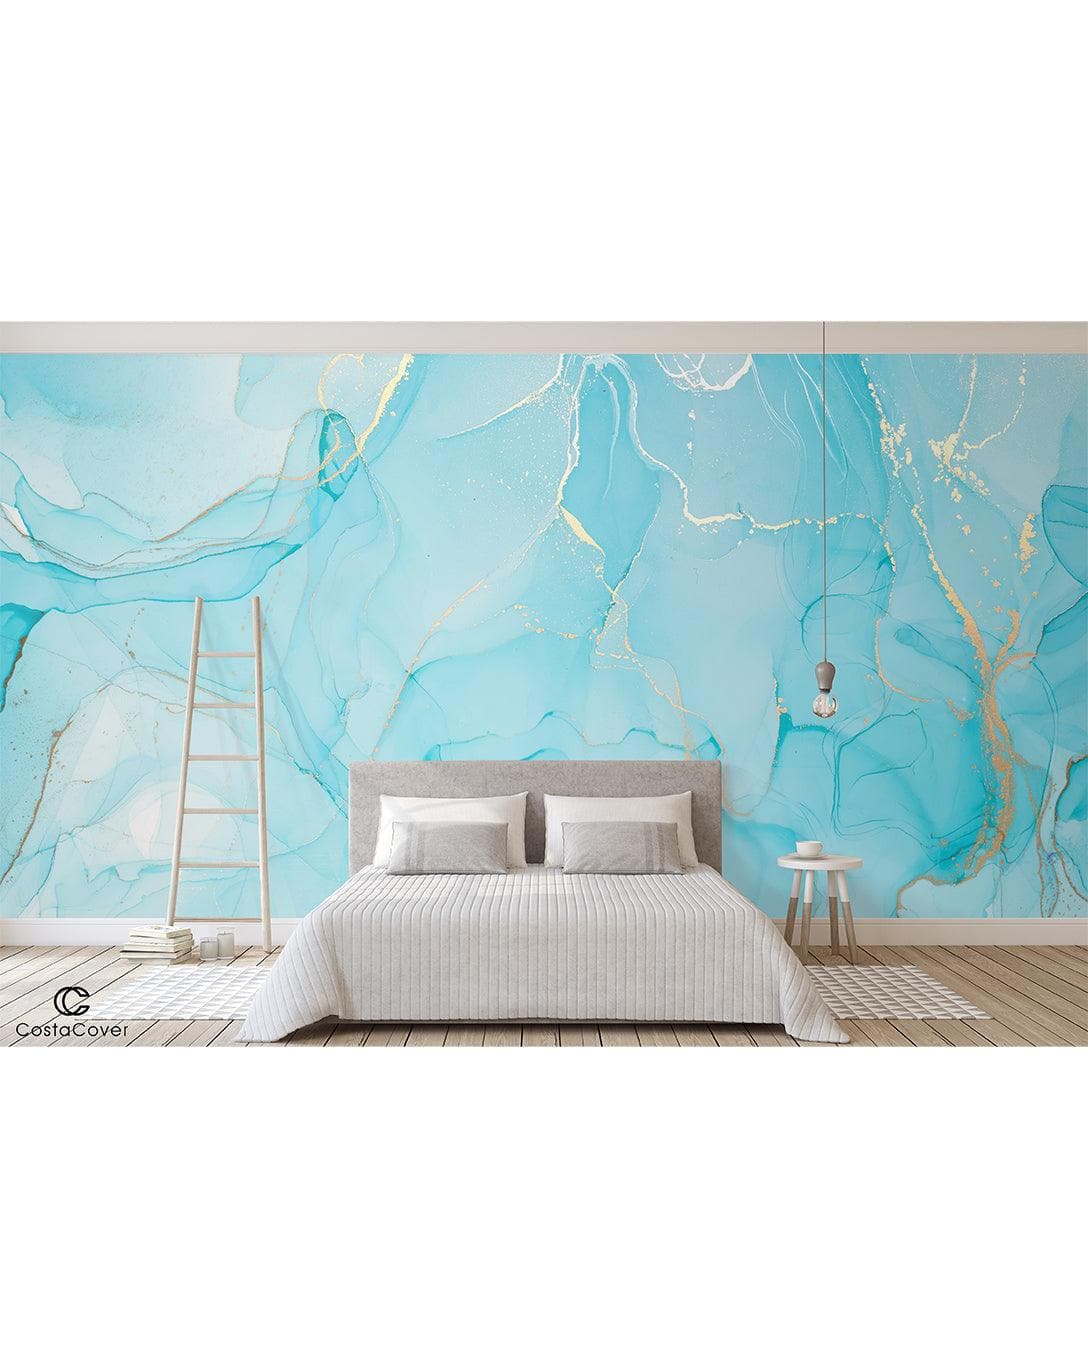 Blue Watercolor Abstract Alcohol Ink Marble Wall Mural Dcal Blue Watercolor Abstract Alcohol Ink Marble Wall Mural Dcal Blue Watercolor Abstract Alcohol Ink Marble Wall Mural Dcal 